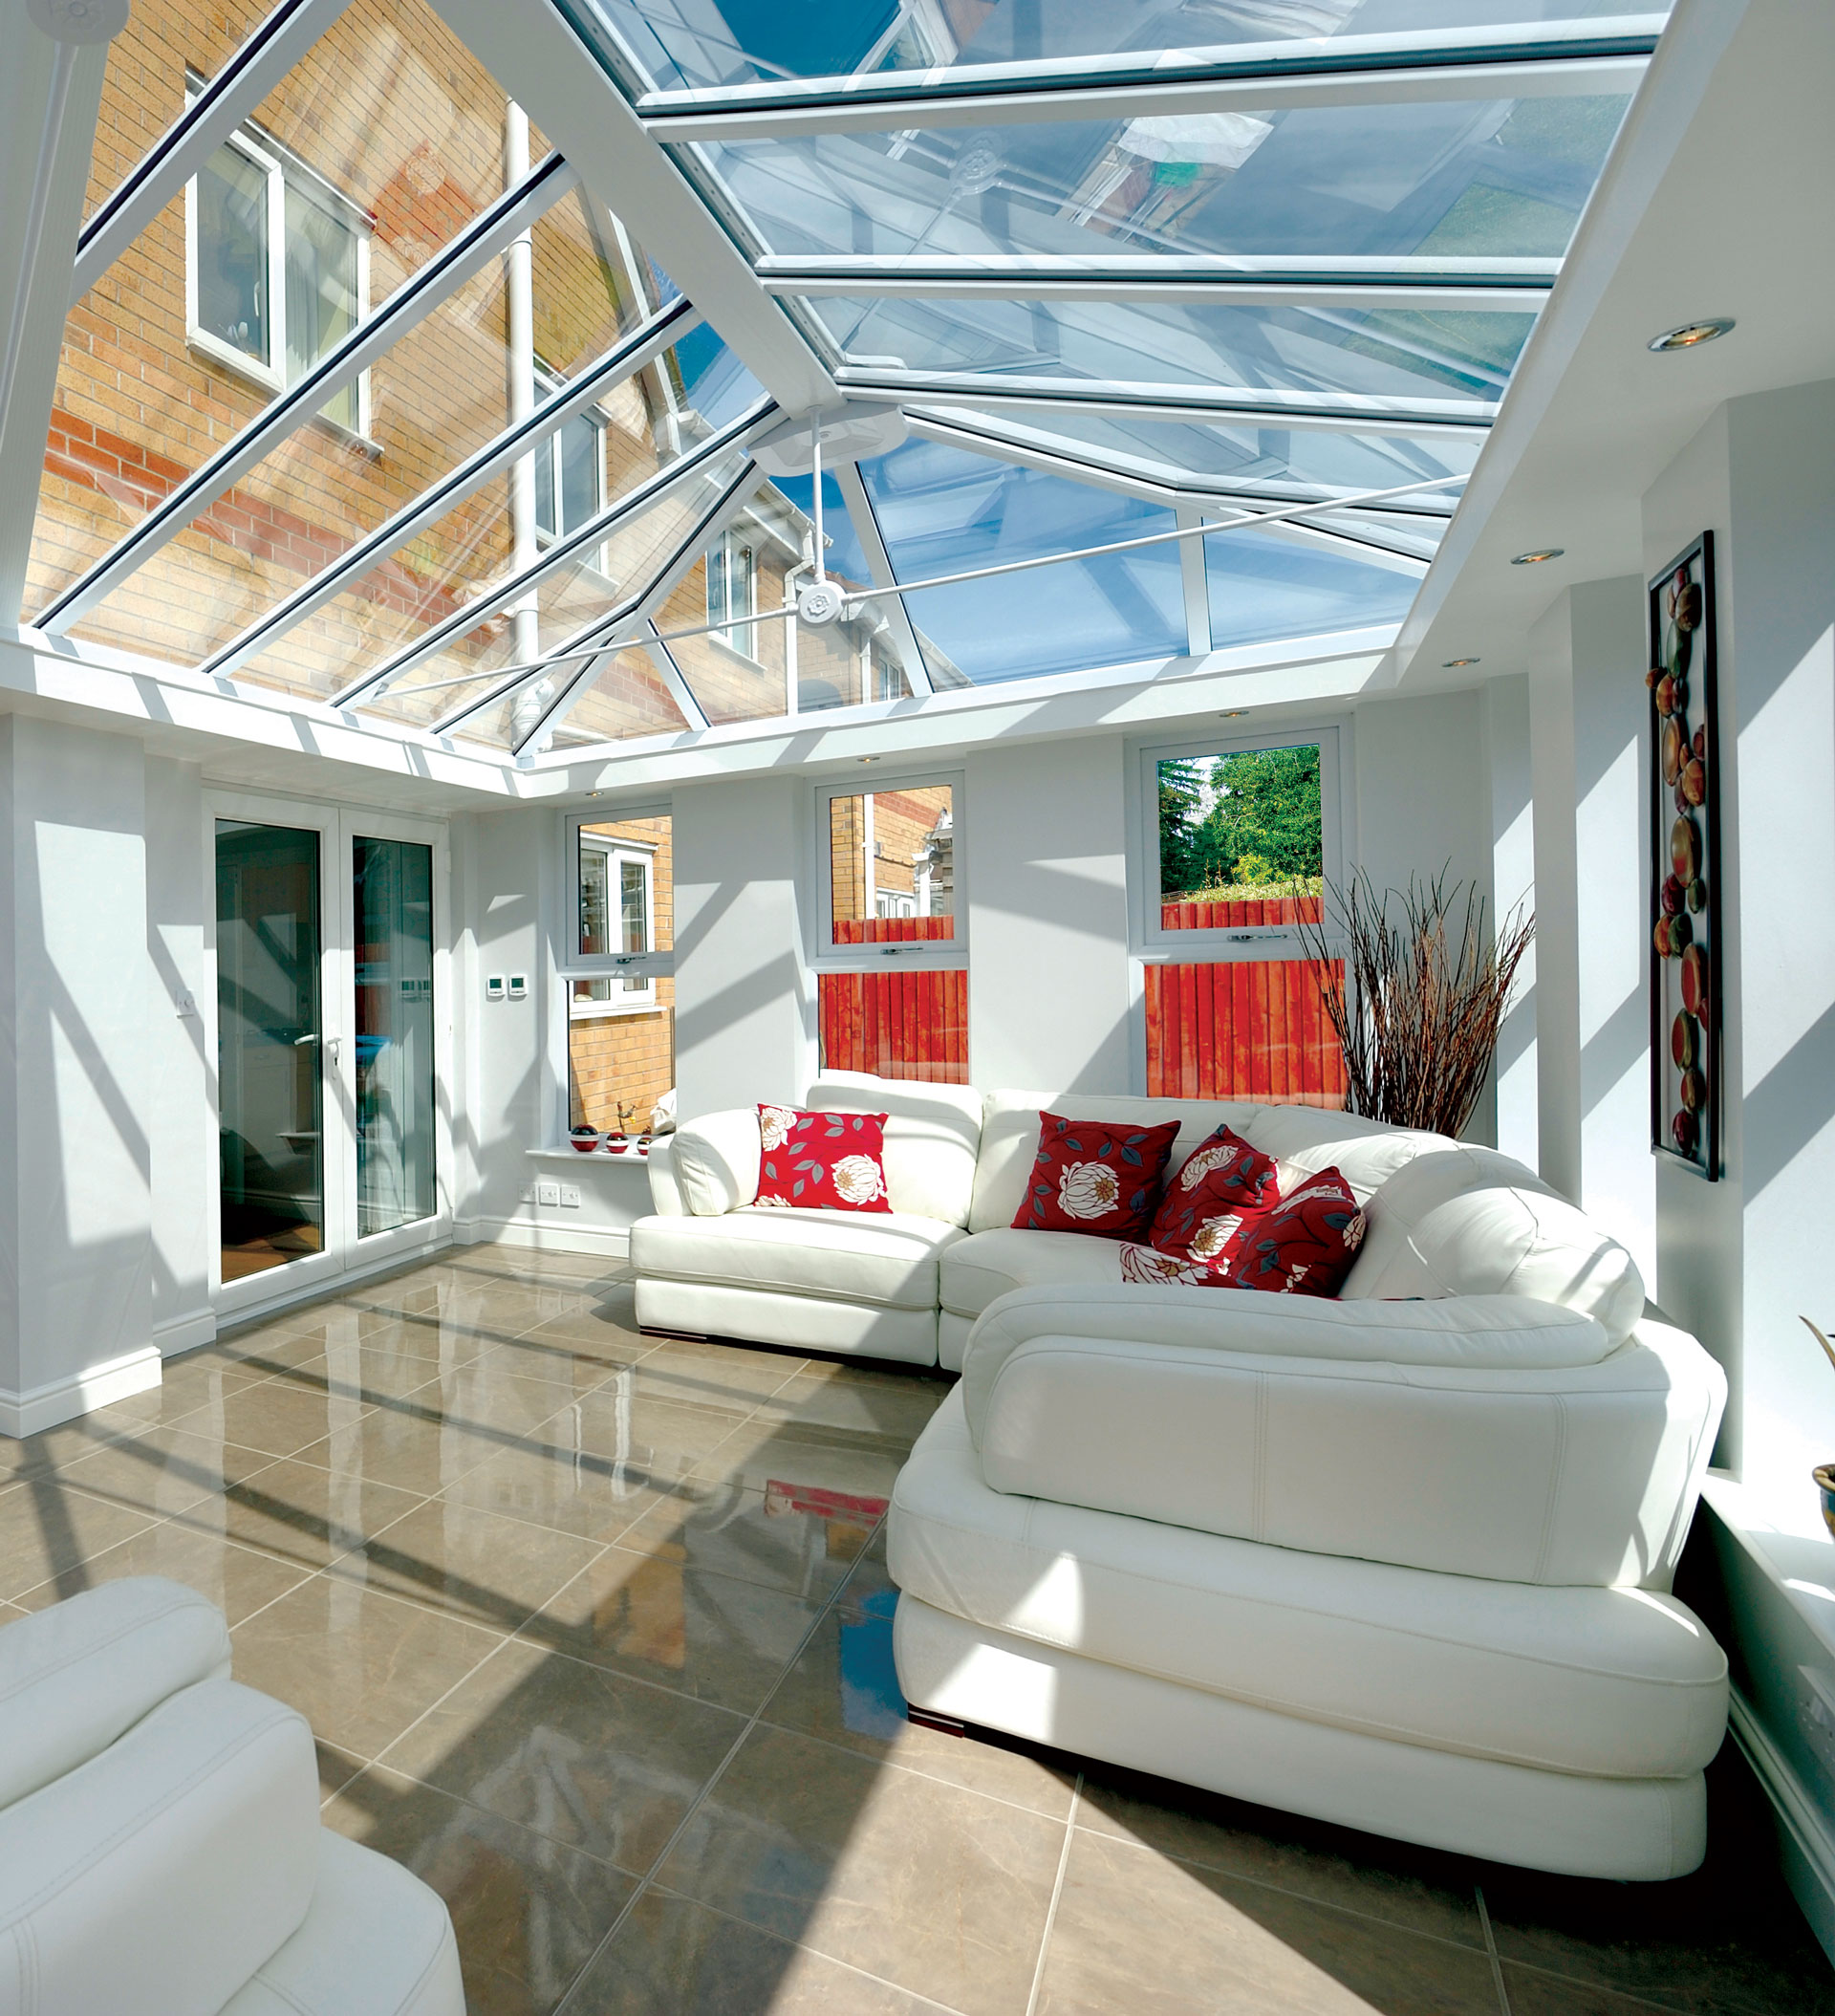 Ultraroof tiled conservatory roofs.